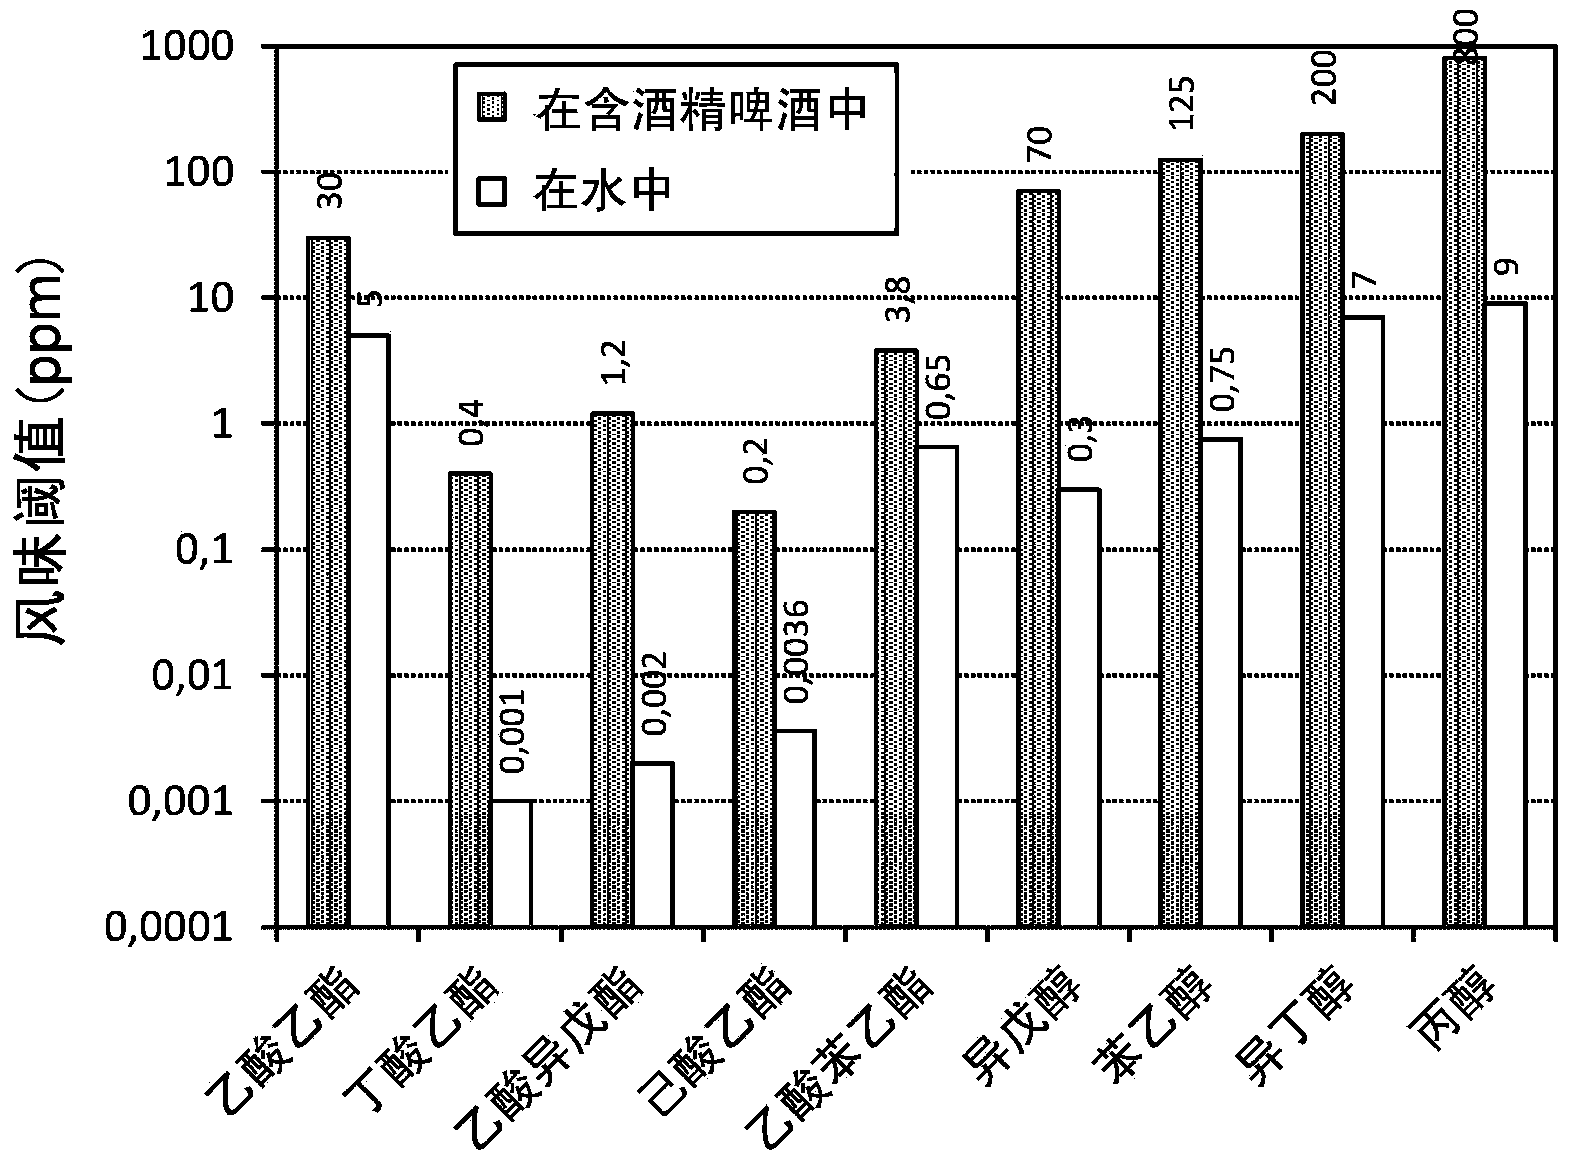 Low alcohol or alcohol free fermented malt based beverage and method for producing it